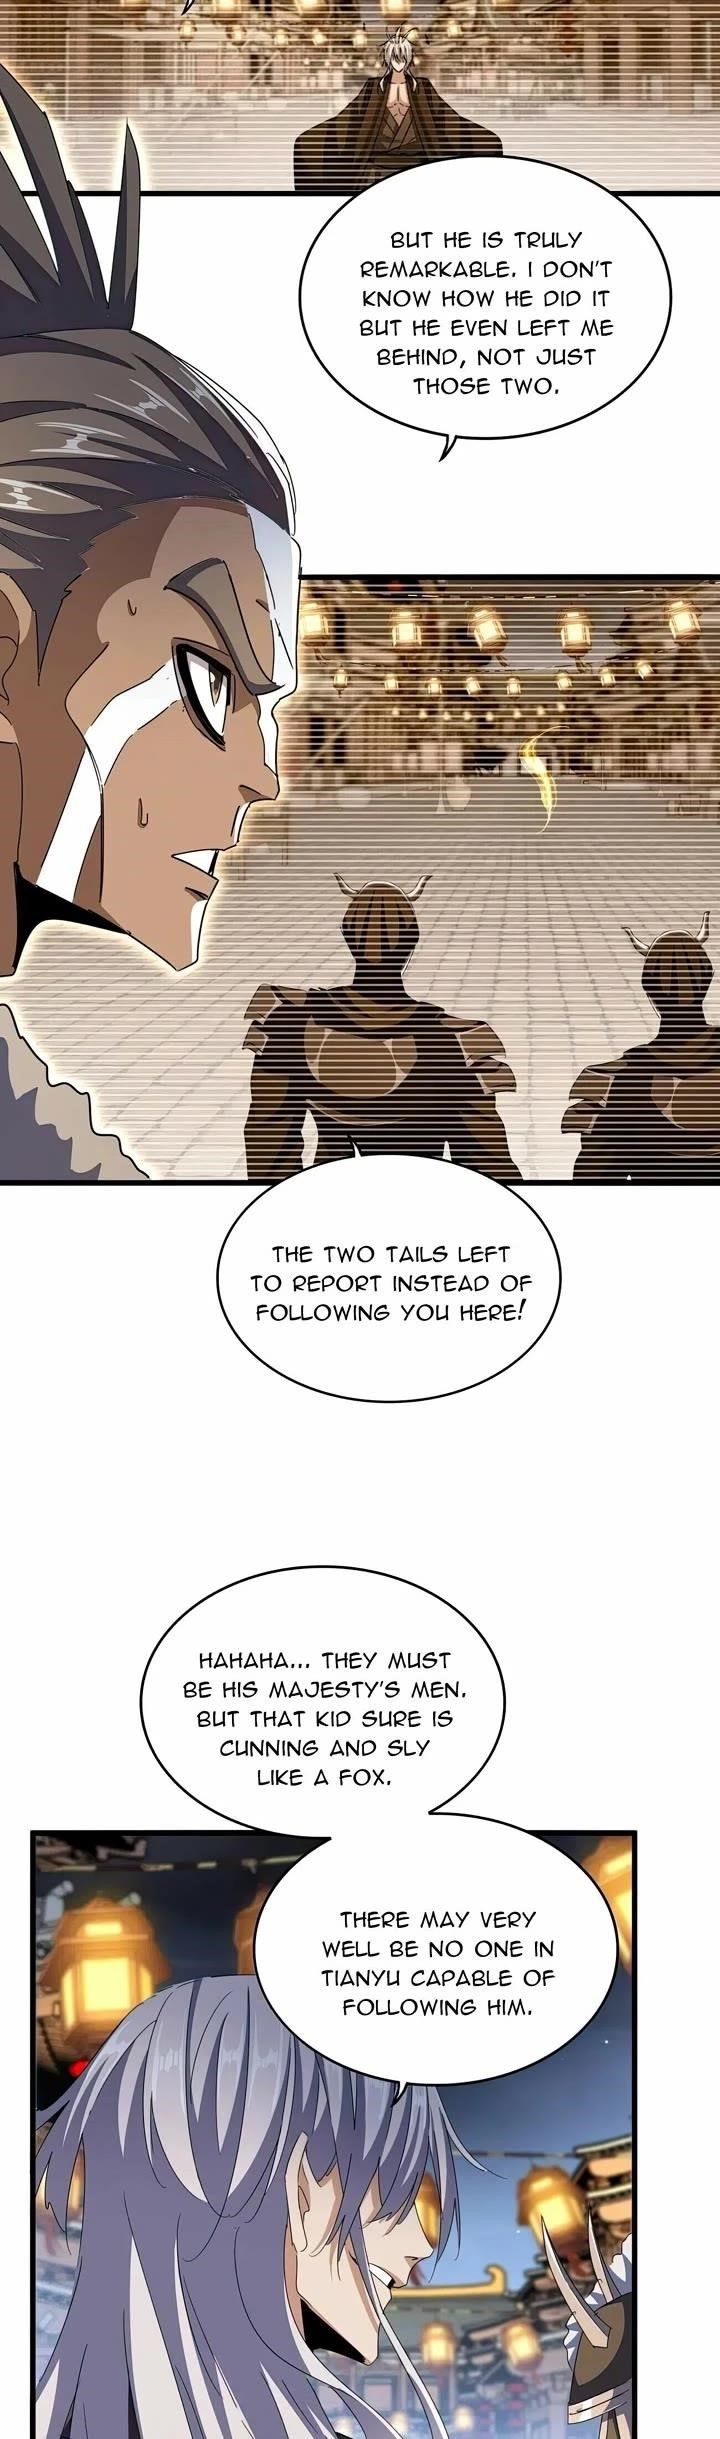 Magic Emperor Chapter 426 - Page 14